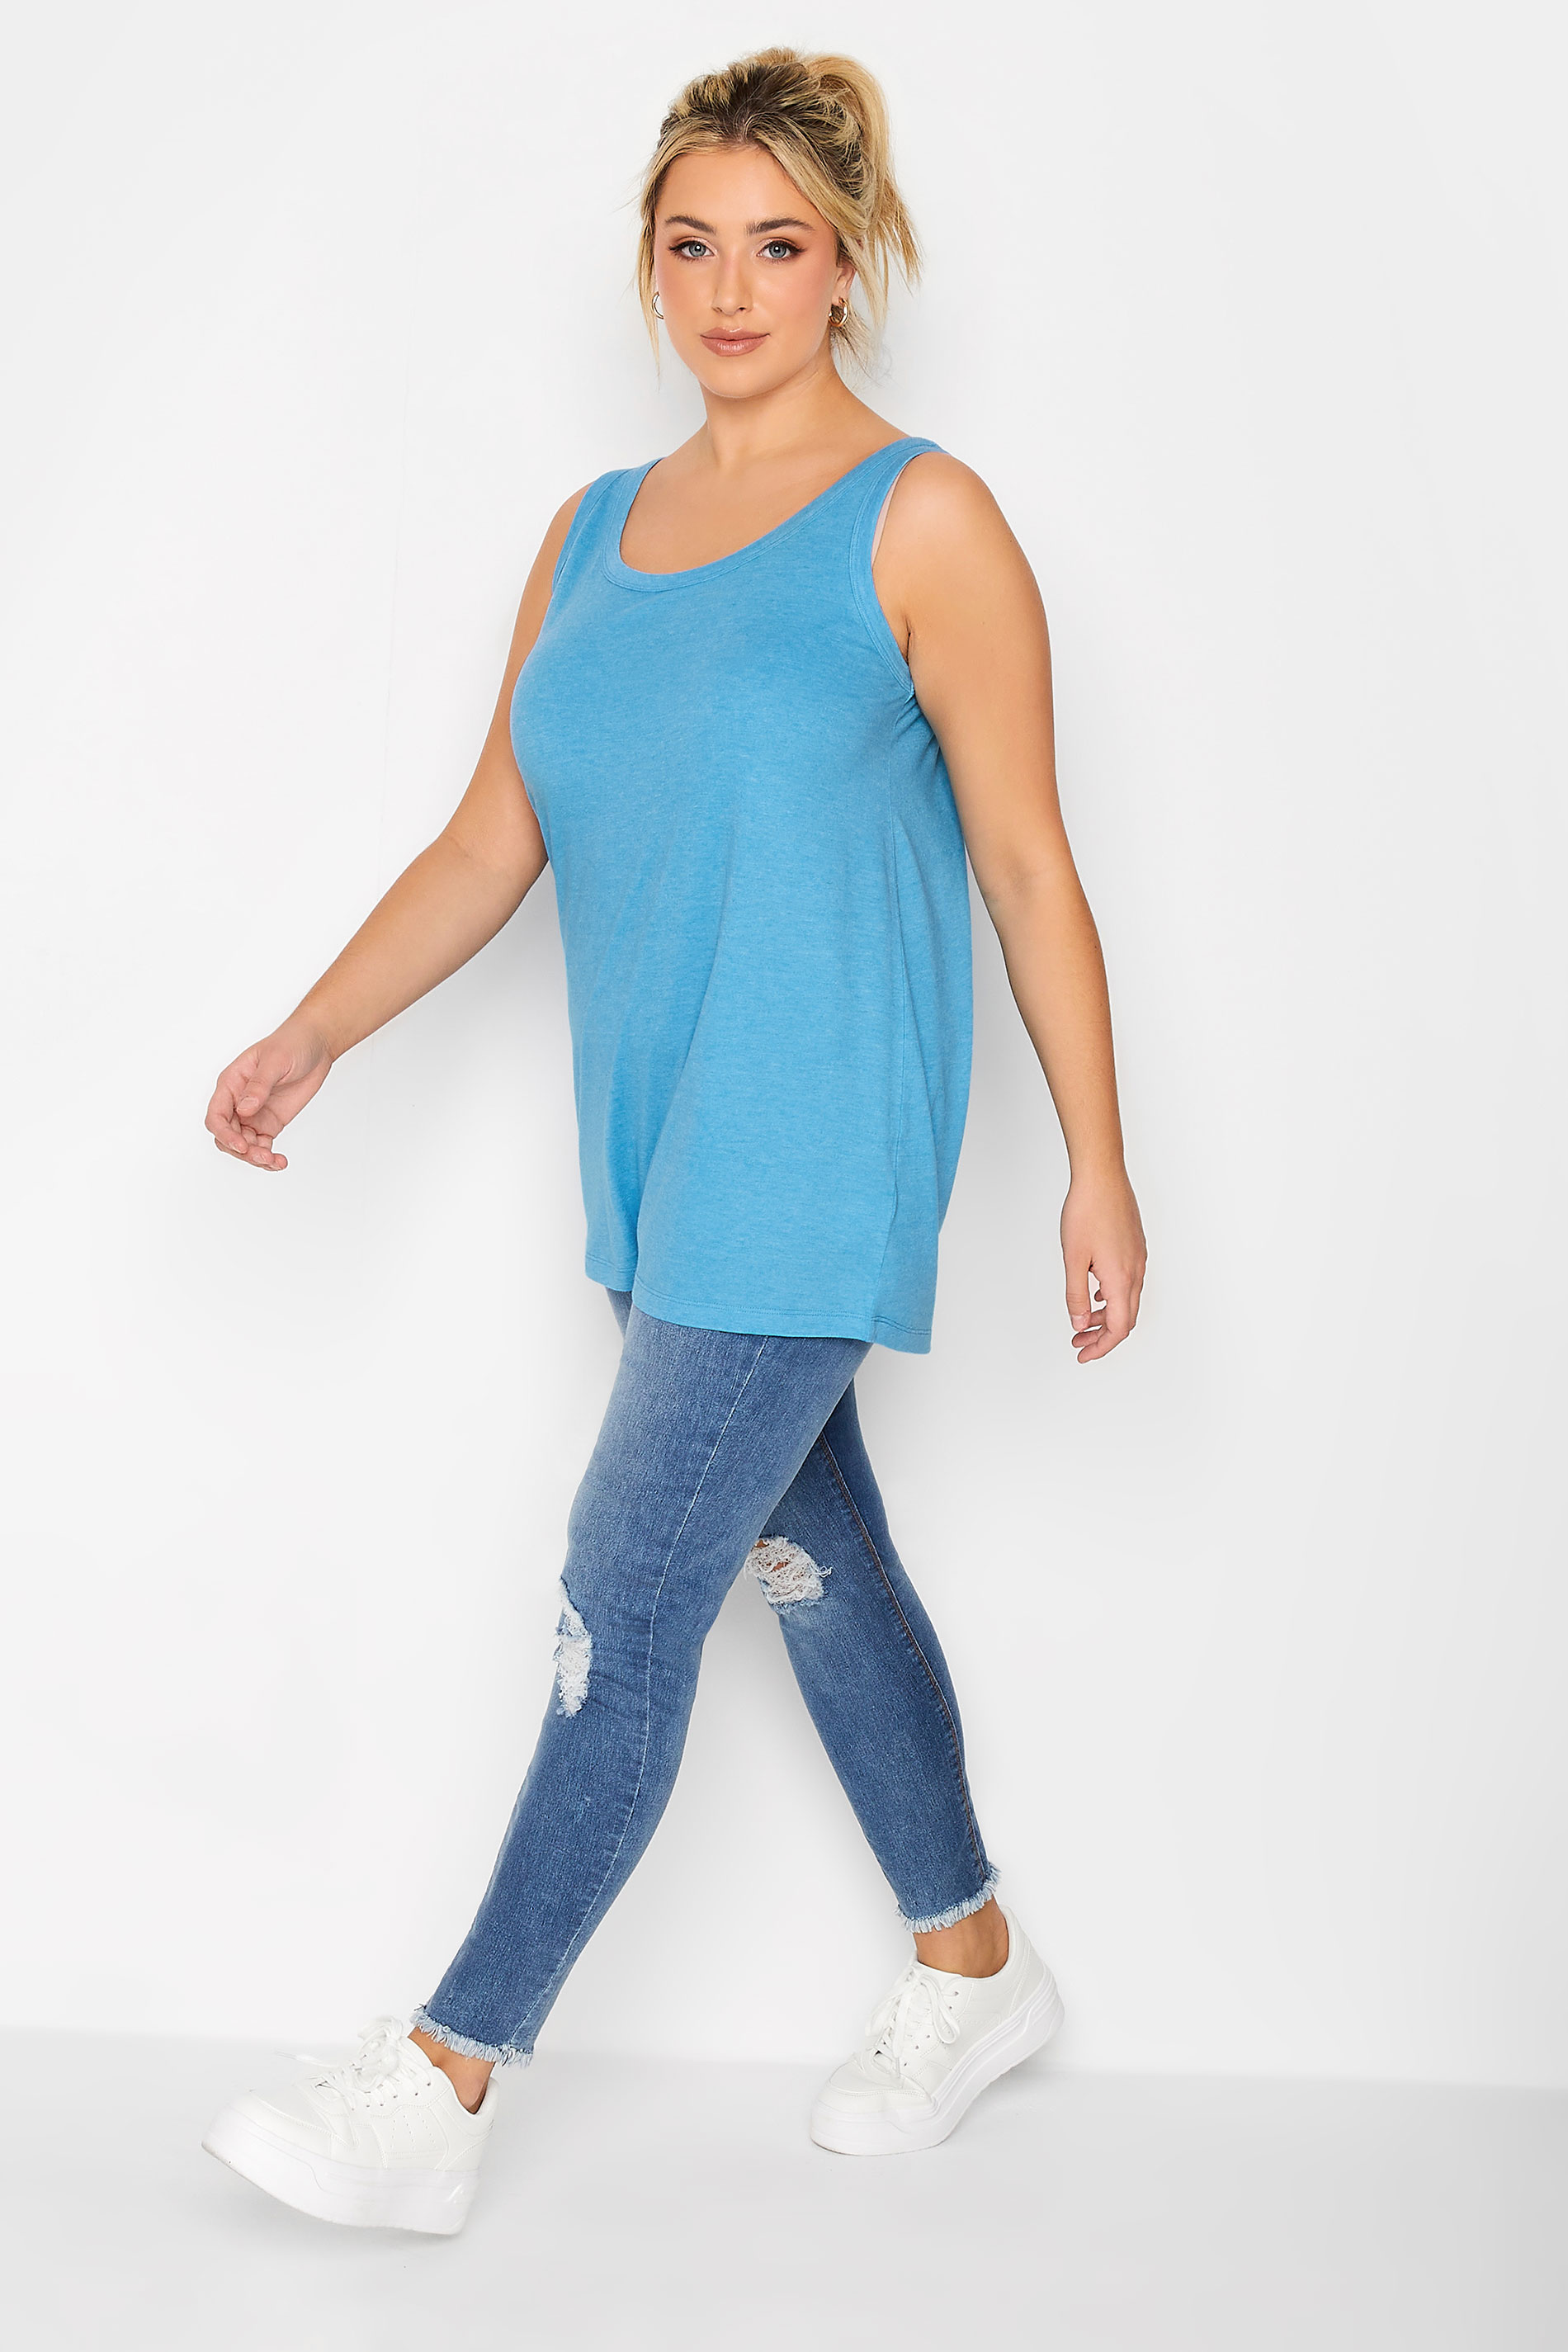 YOURS Plus Size Curve Blue Marl Essential Vest Top | Yours Clothing  2